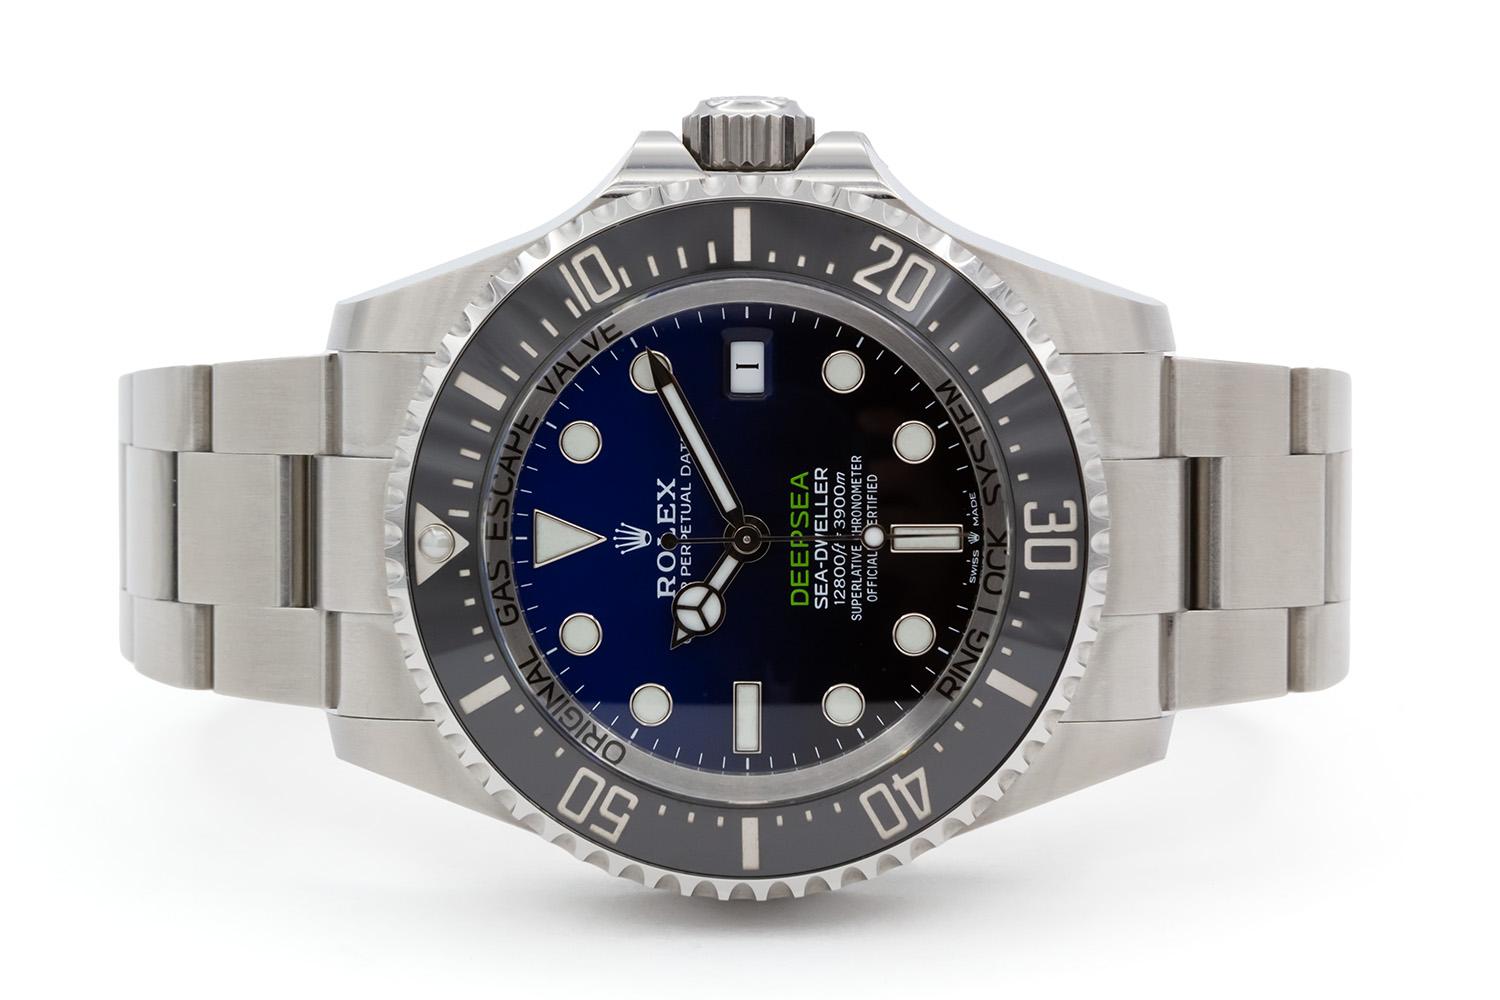 We are pleased to offer this Brand New Unworn August 2023 Rolex DeepSea James Cameron Sea-Dweller 136660 which is still under the Rolex 5-year factory warranty. This classic and highly sought after Rolex sport watch features a 44mm stainless steel